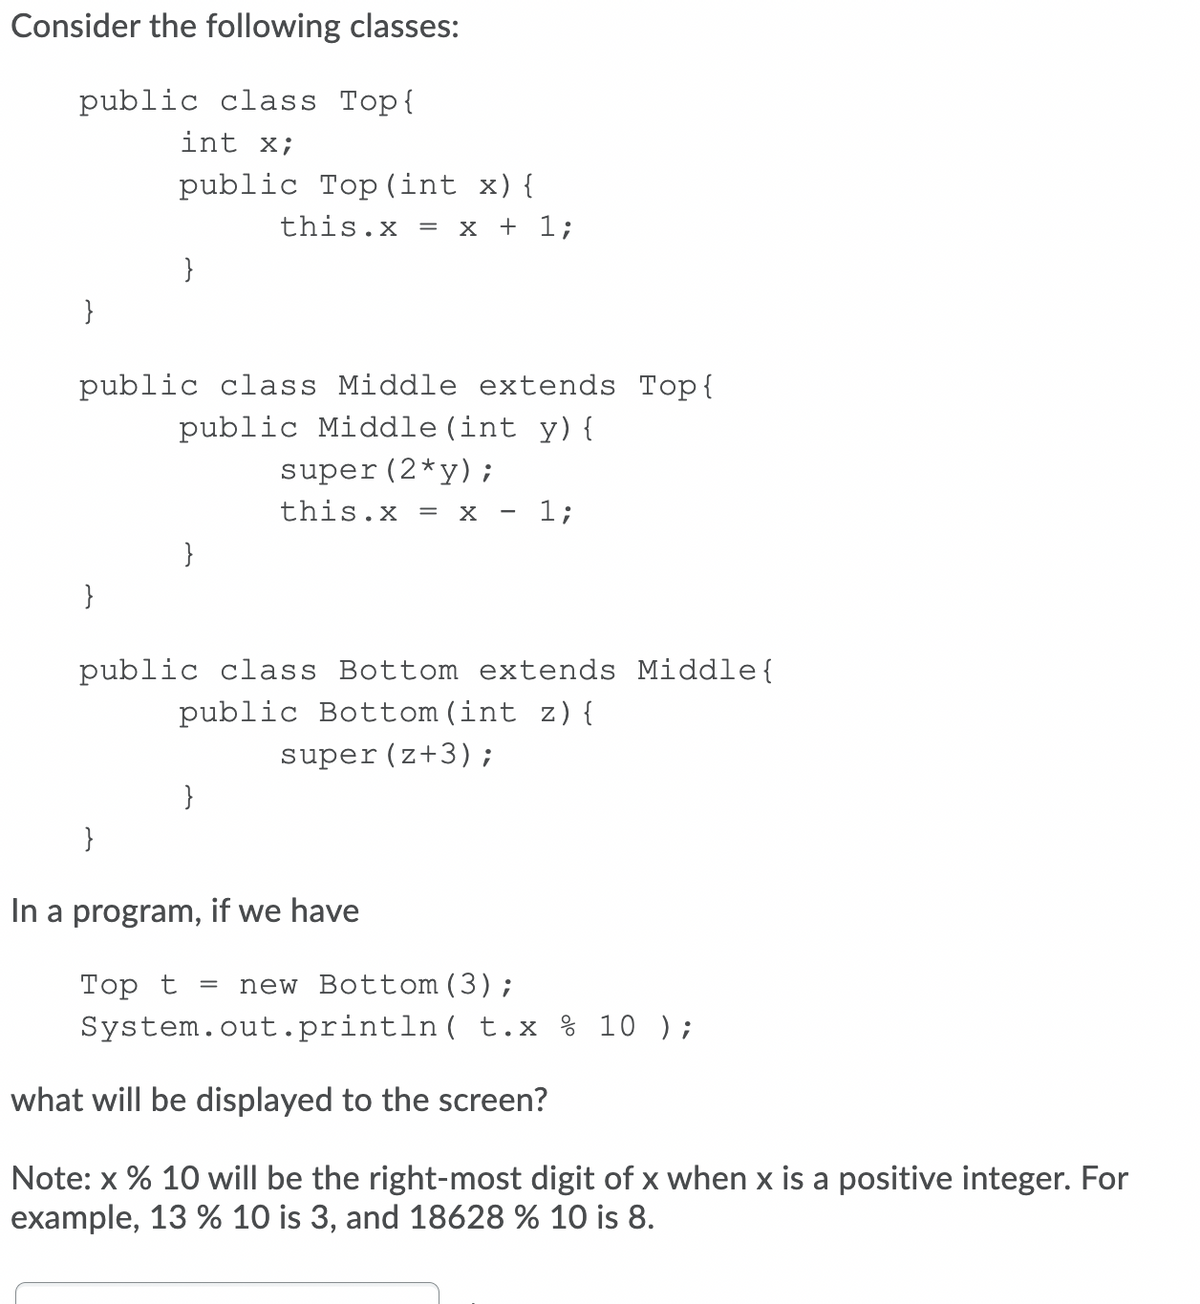 Consider the following classes:
public class Top{
int x;
public Top (int x){
this.x = x + 1;
}
}
public class Middle extends Top{
public Middle (int y) {
super(2*y);
this.x = x - 1;
}
}
public class Bottom extends Middle{
public Bottom(int z) {
super (z+3);
}
}
In a program, if we have
Тоp t
System.out.println( t.x % 10 );
new Bottom(3);
what will be displayed to the screen?
Note: x % 10 will be the right-most digit of x when x is a positive integer. For
example, 13 % 10 is 3, and 18628 % 10 is 8.
